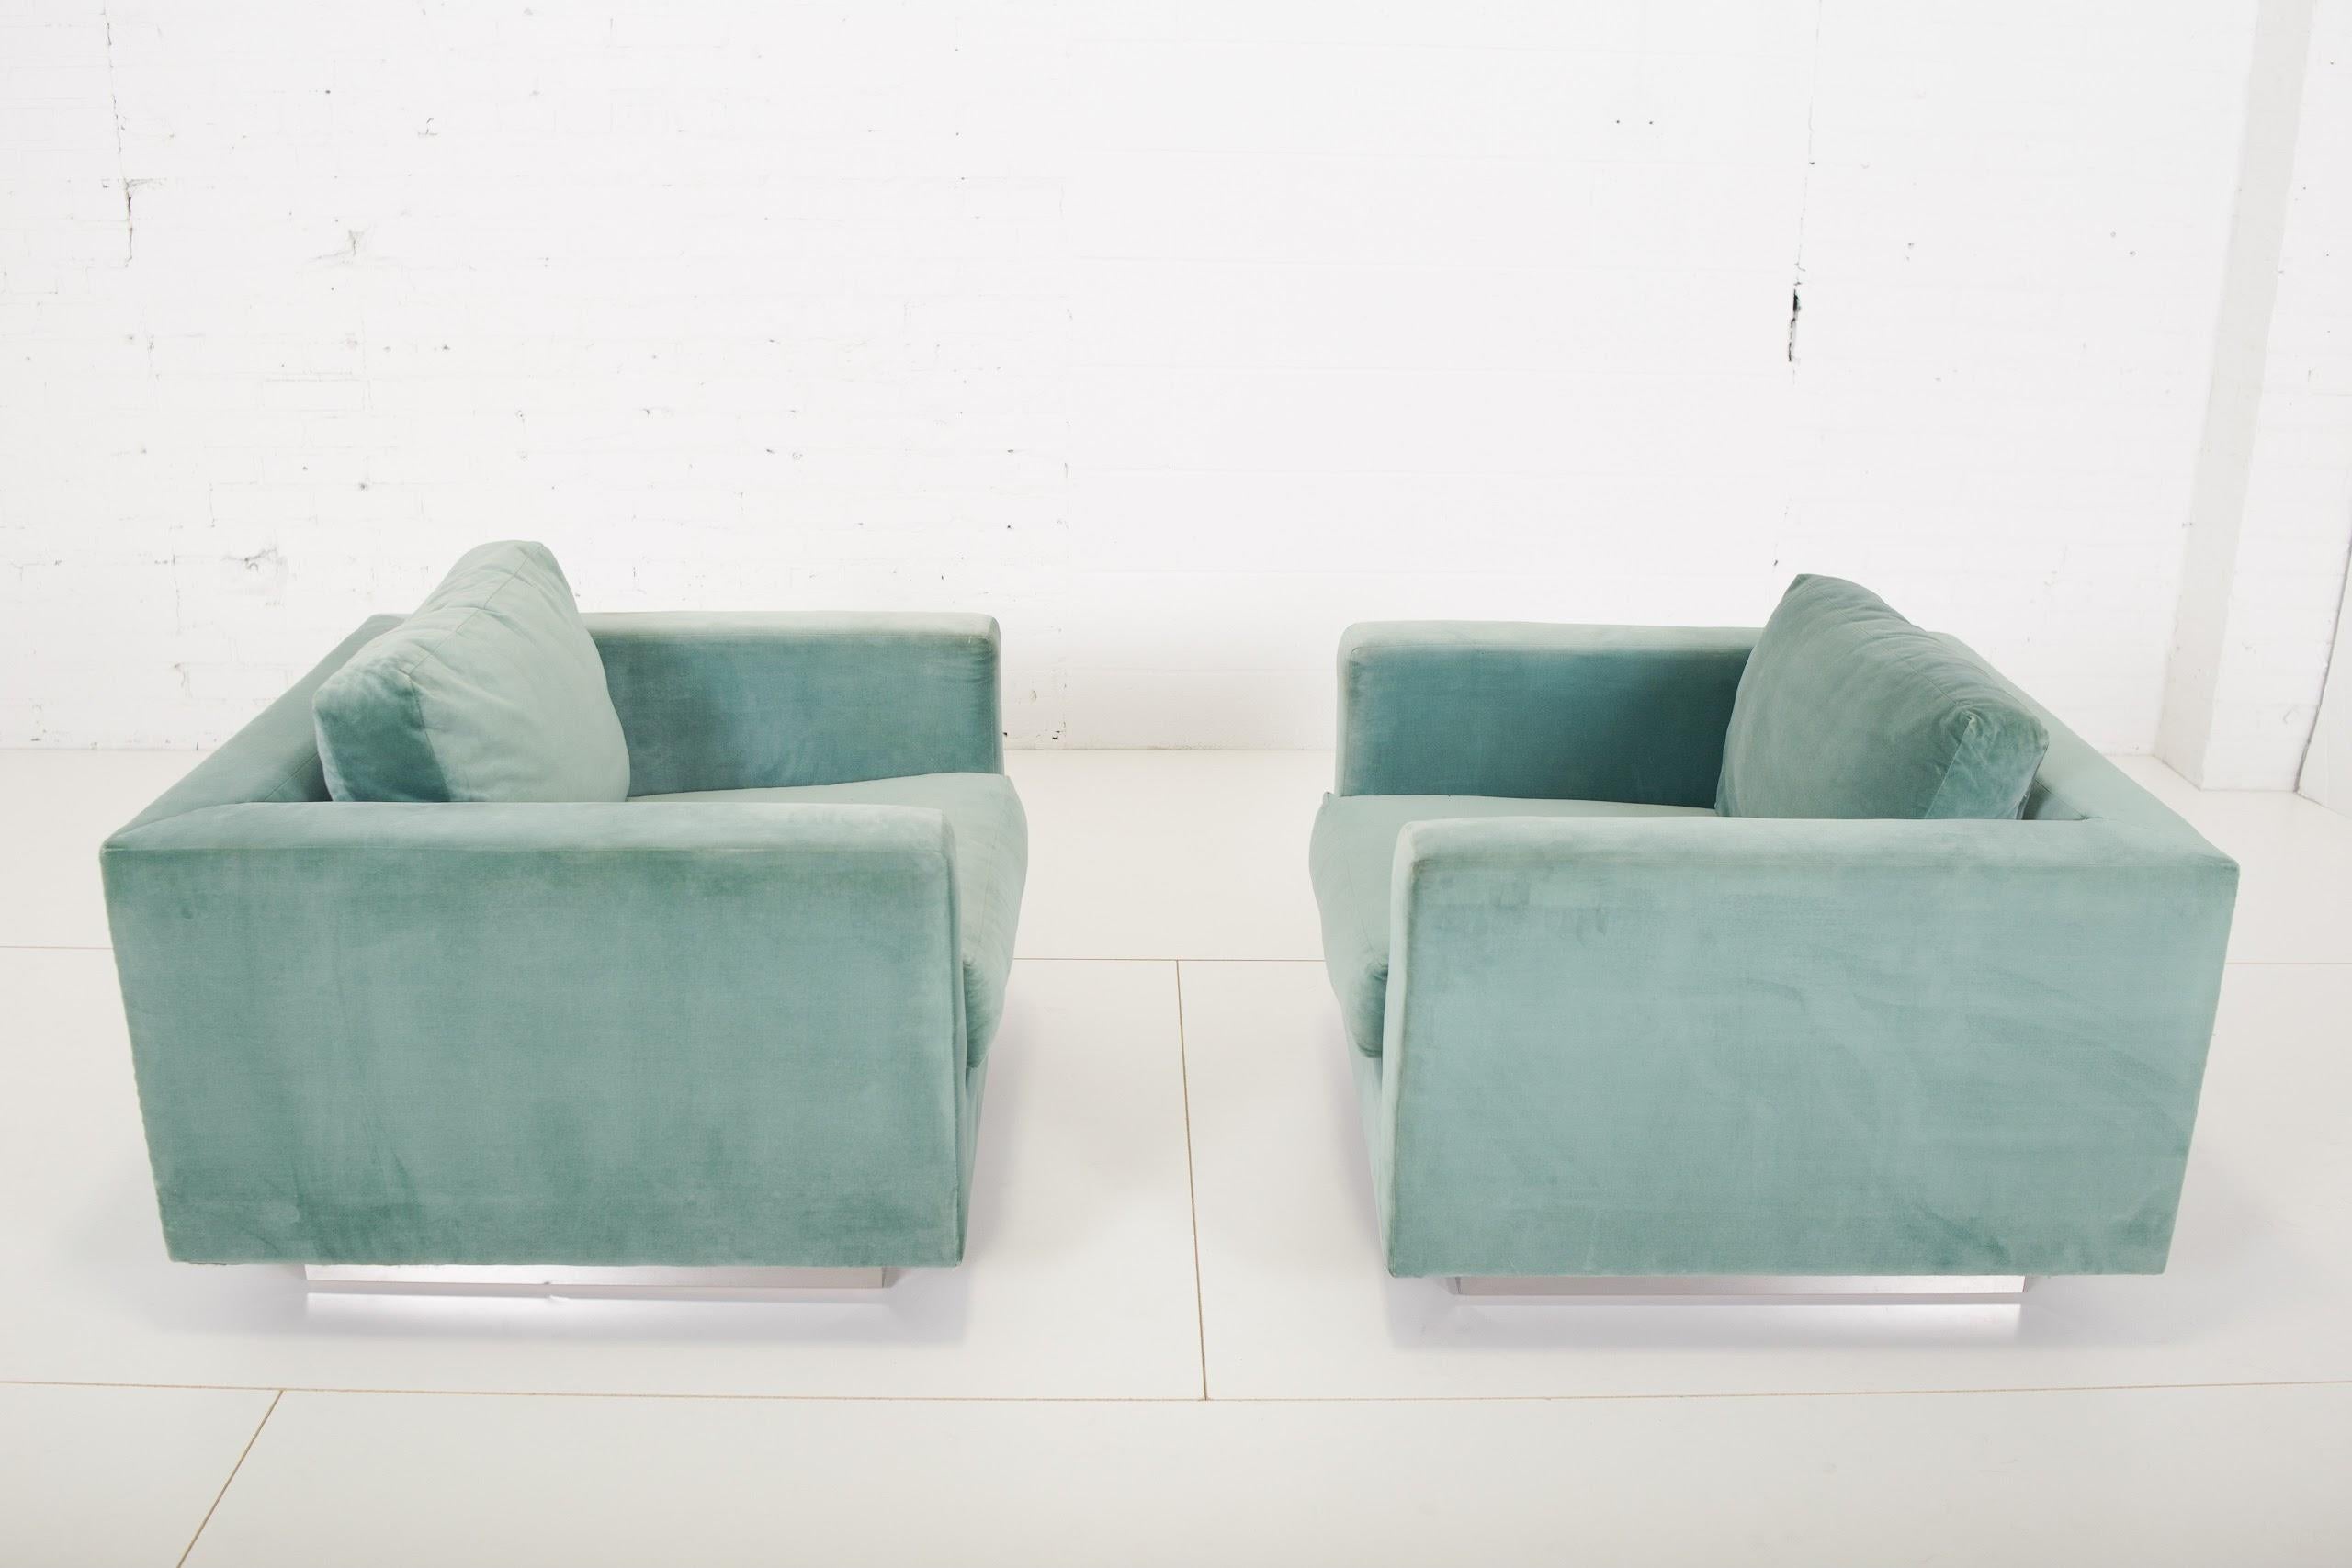 Pair of tuxedo lounge chairs by Edward Wormley for Dunbar. Original teal cotton velvet is in great shape, as are the chrome bases. Set was just cleaned.


 